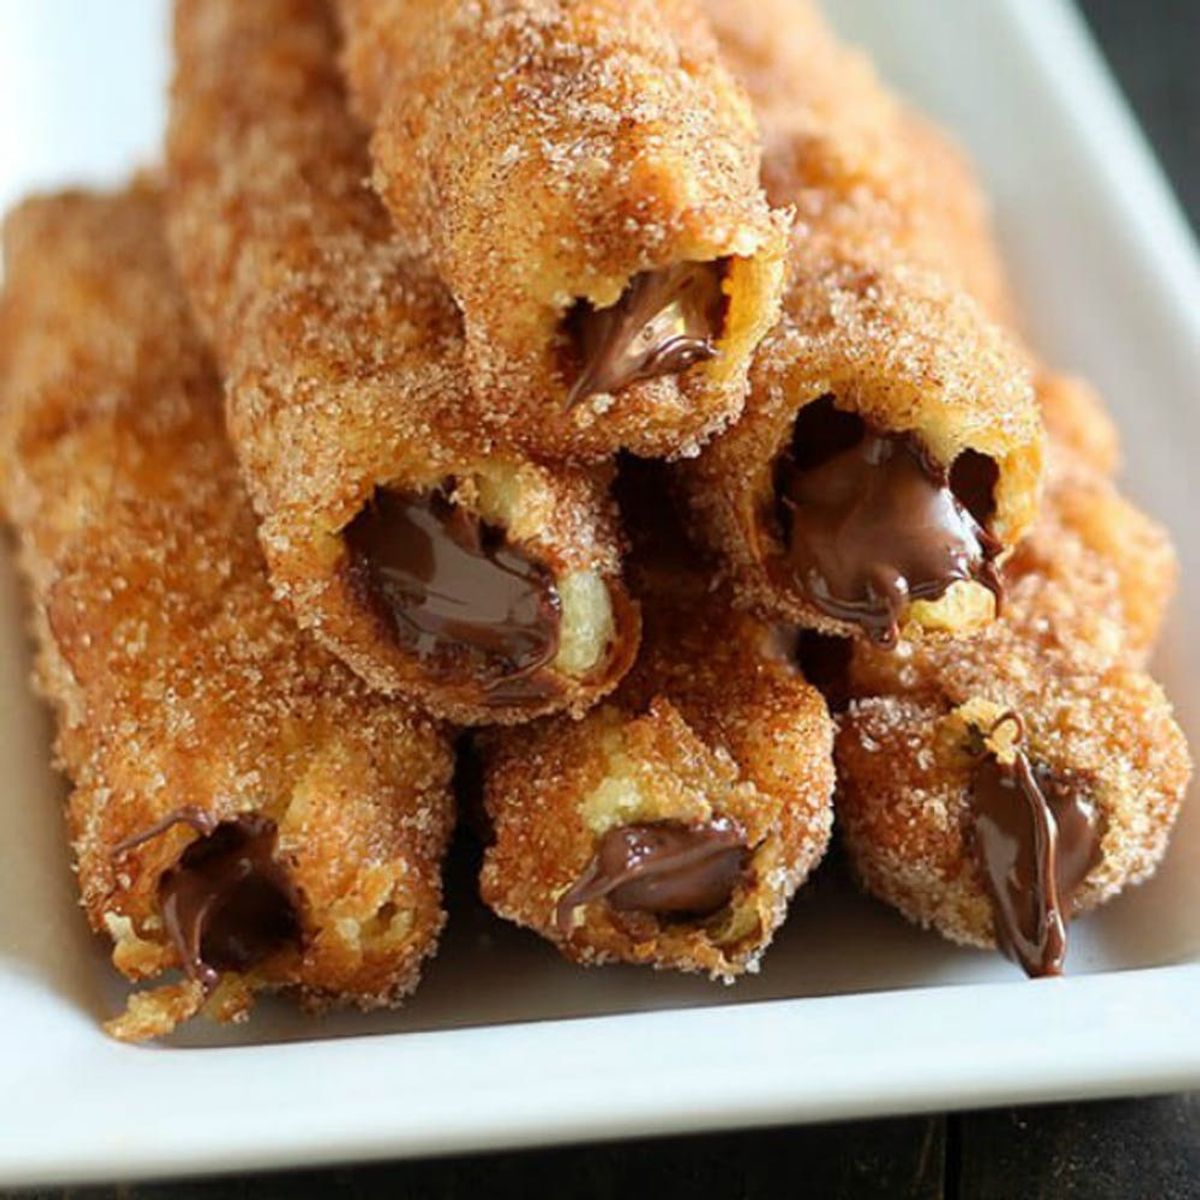 Churros Stuffed With Nutella and More Mind-Blowing Recipes for the Fried Dough Treat